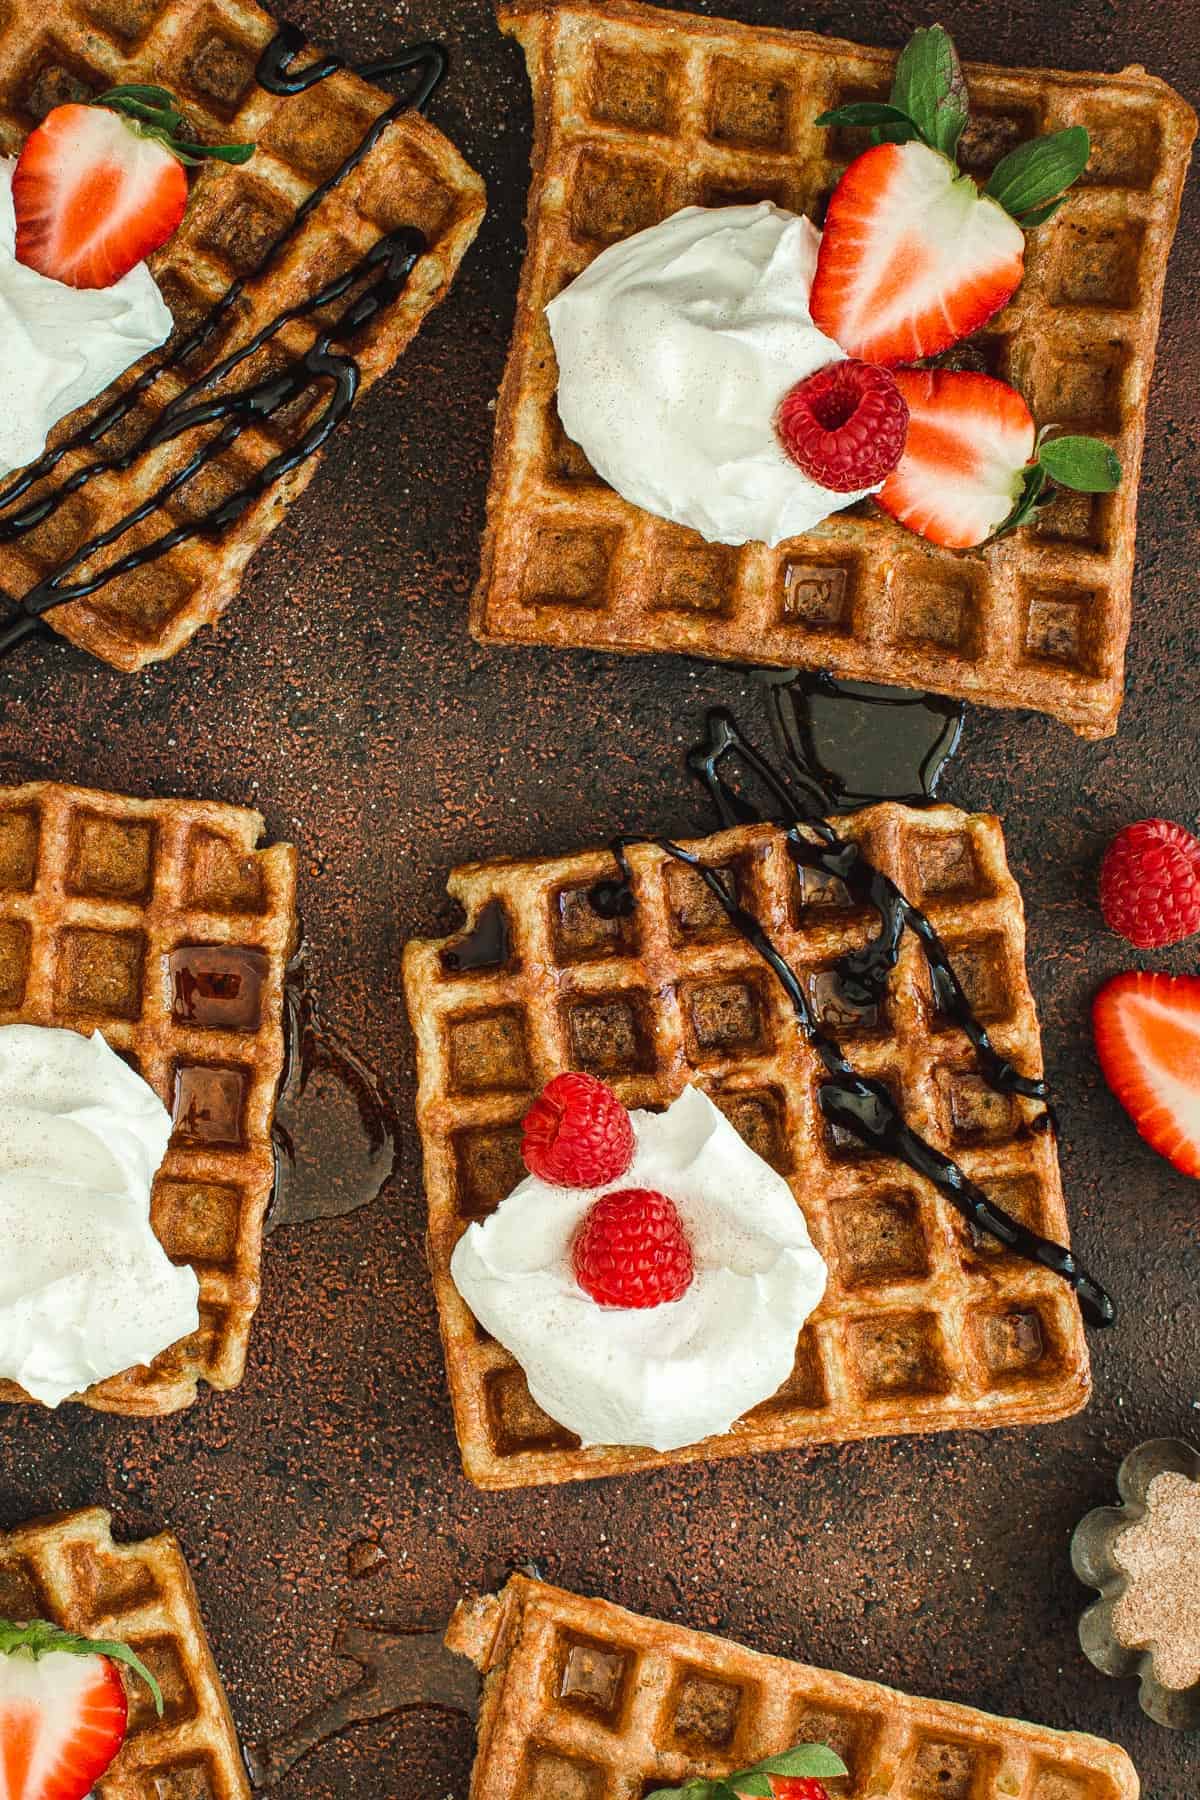 Protein waffles with whipped cream, chocolate syrup, and berries.